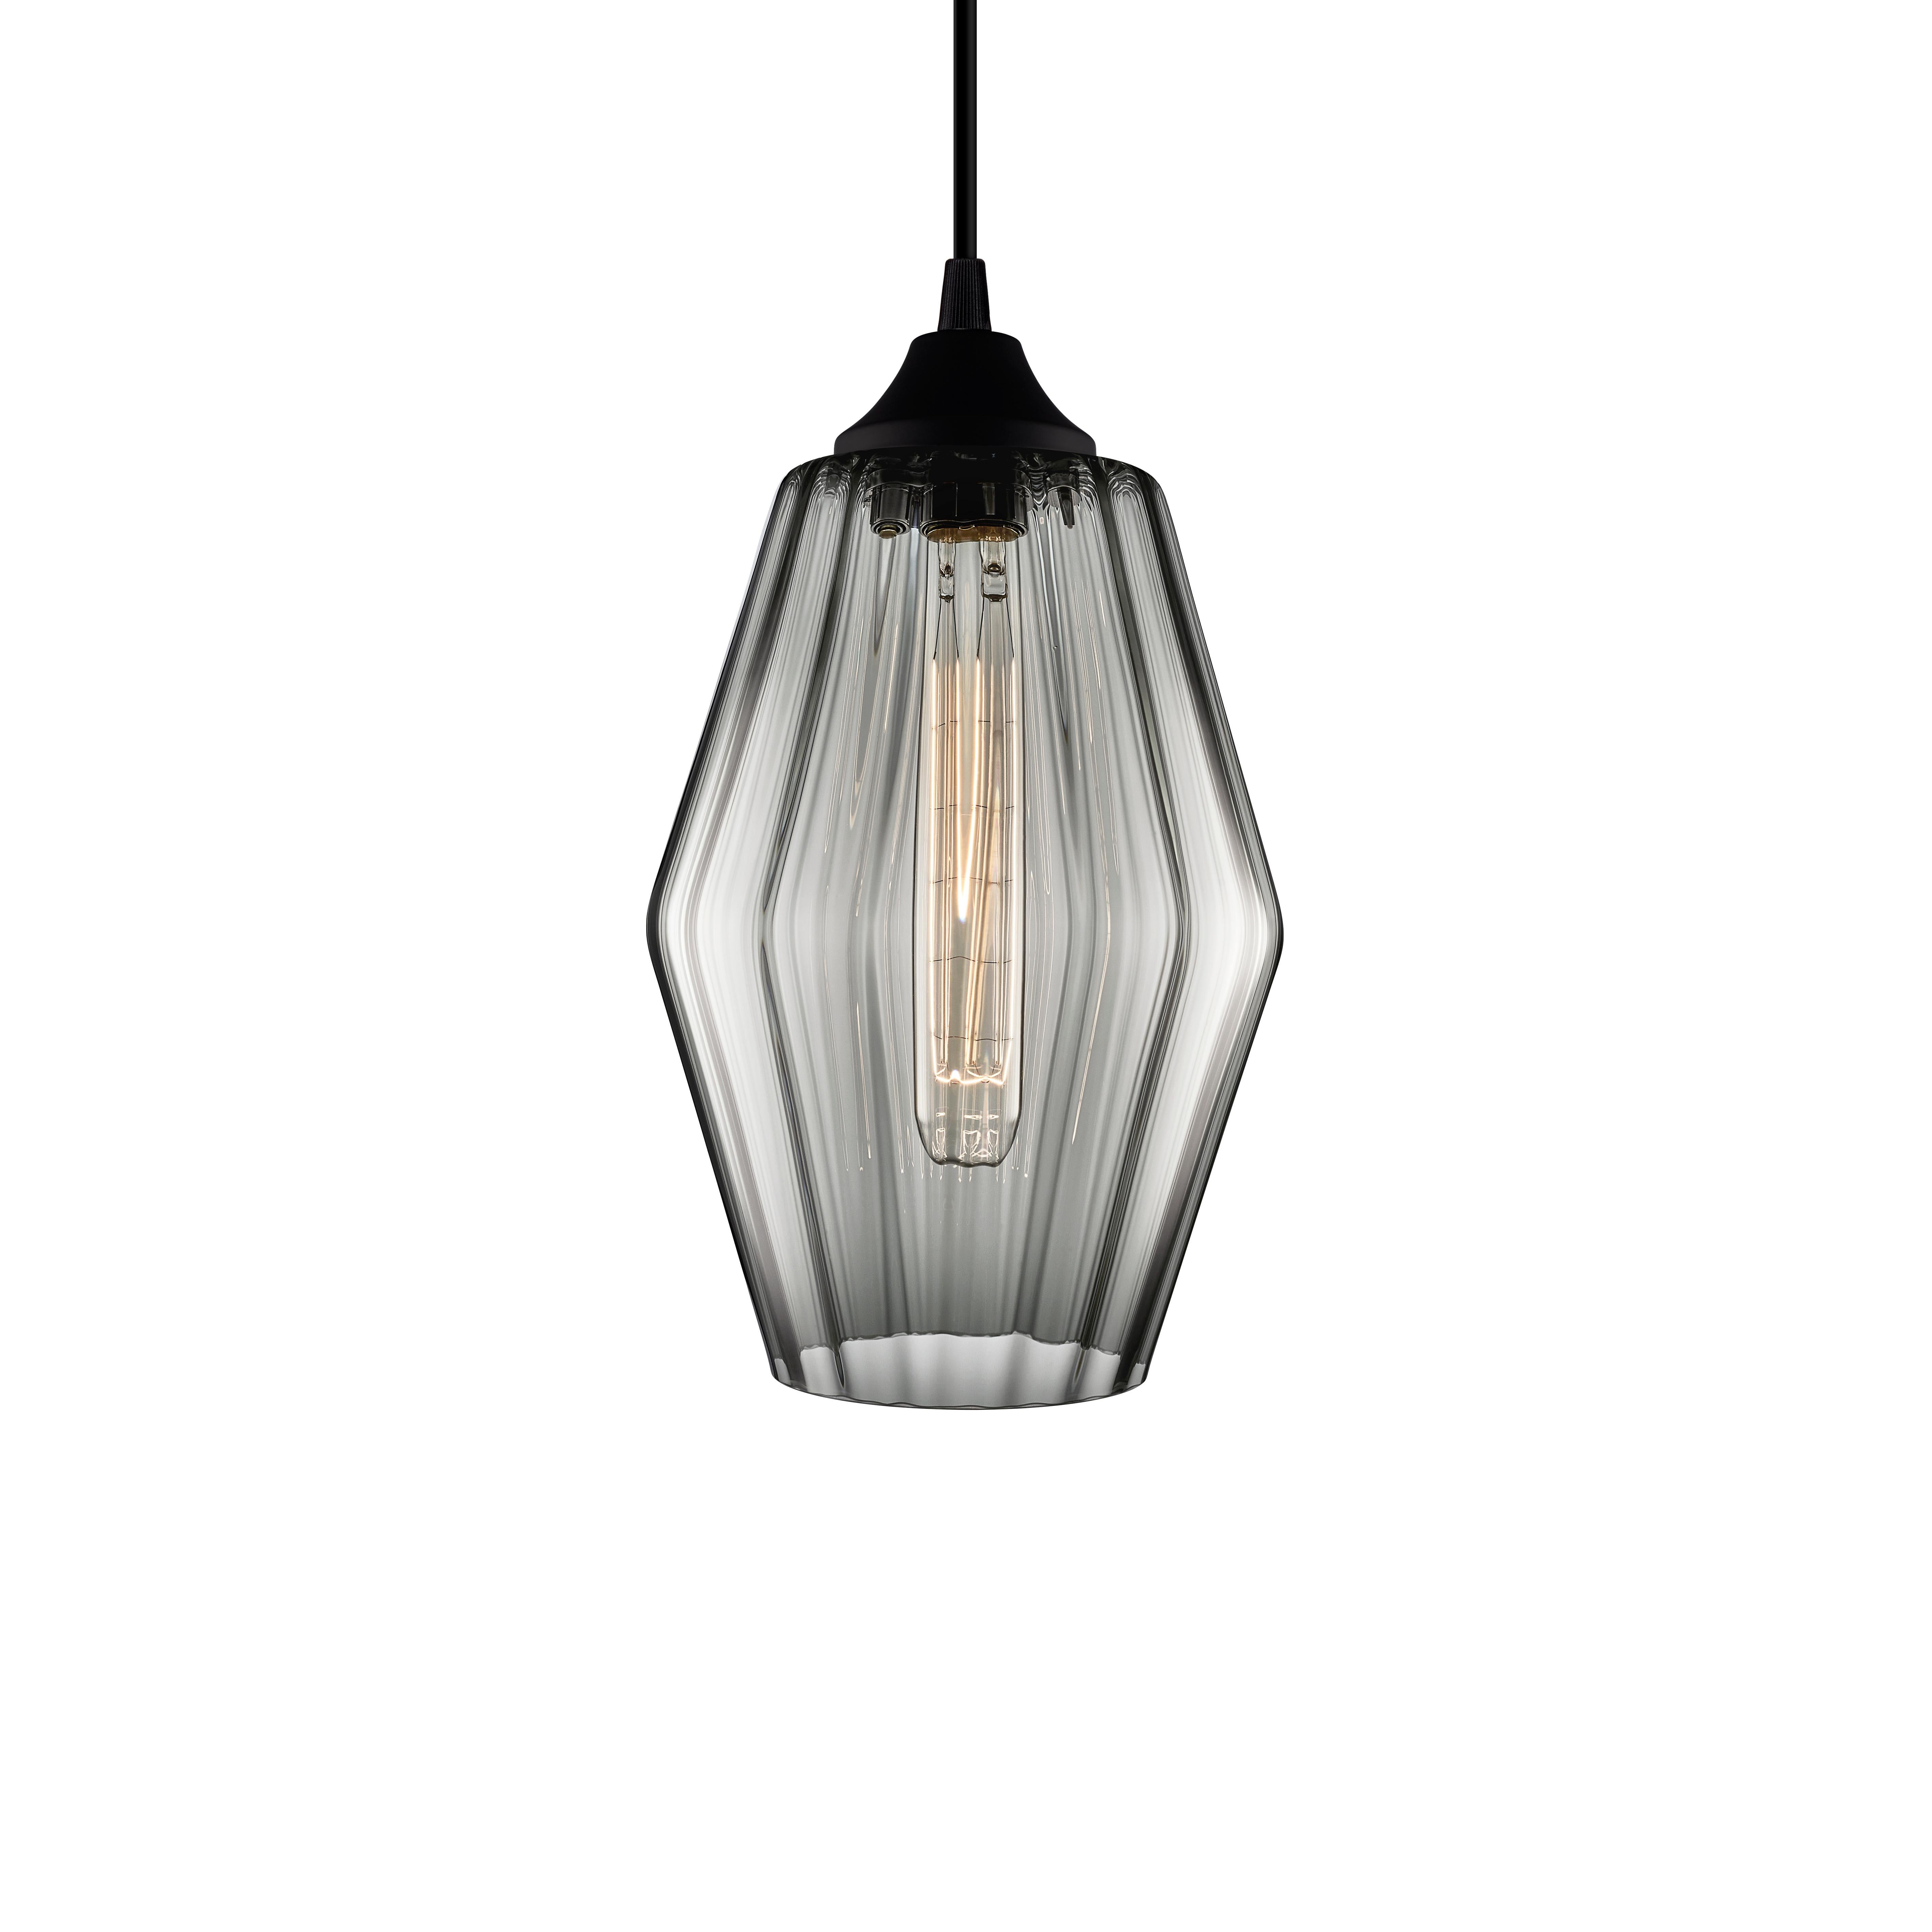 Marquise Petite Fig Handblown Modern Glass Pendant Light, Made in the USA In New Condition For Sale In Beacon, NY